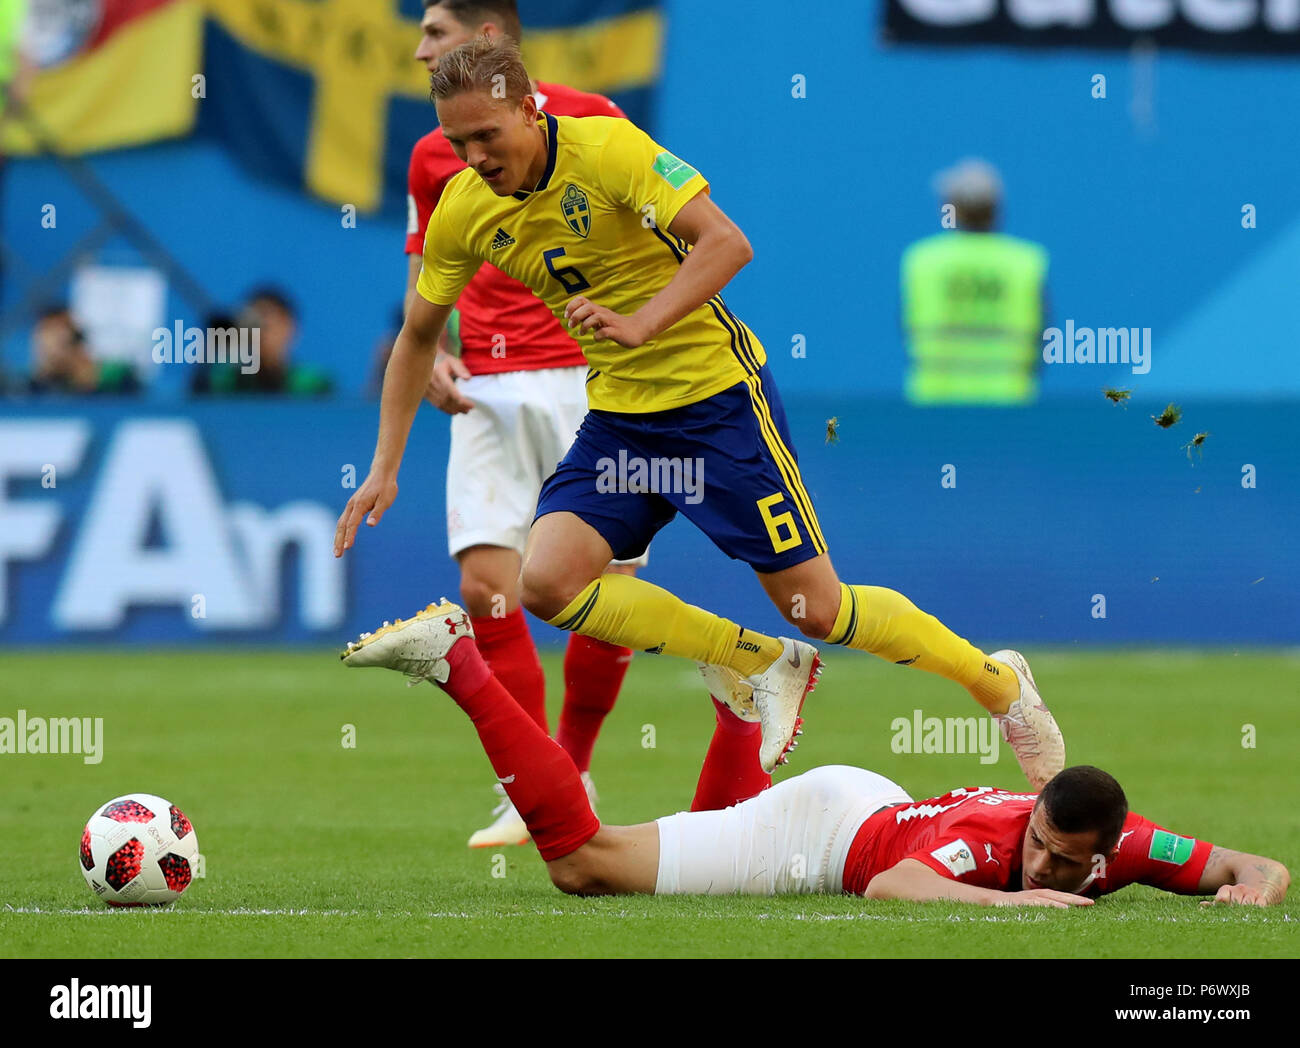 Saint Petersburg, Russia. 3rd July, 2018. Granit Xhaka (bottom) of Switzerland vies with Ludwig Augustinsson of Sweden during the 2018 FIFA World Cup round of 16 match between Switzerland and Sweden in Saint Petersburg, Russia, July 3, 2018. Credit: Yang Lei/Xinhua/Alamy Live News Stock Photo